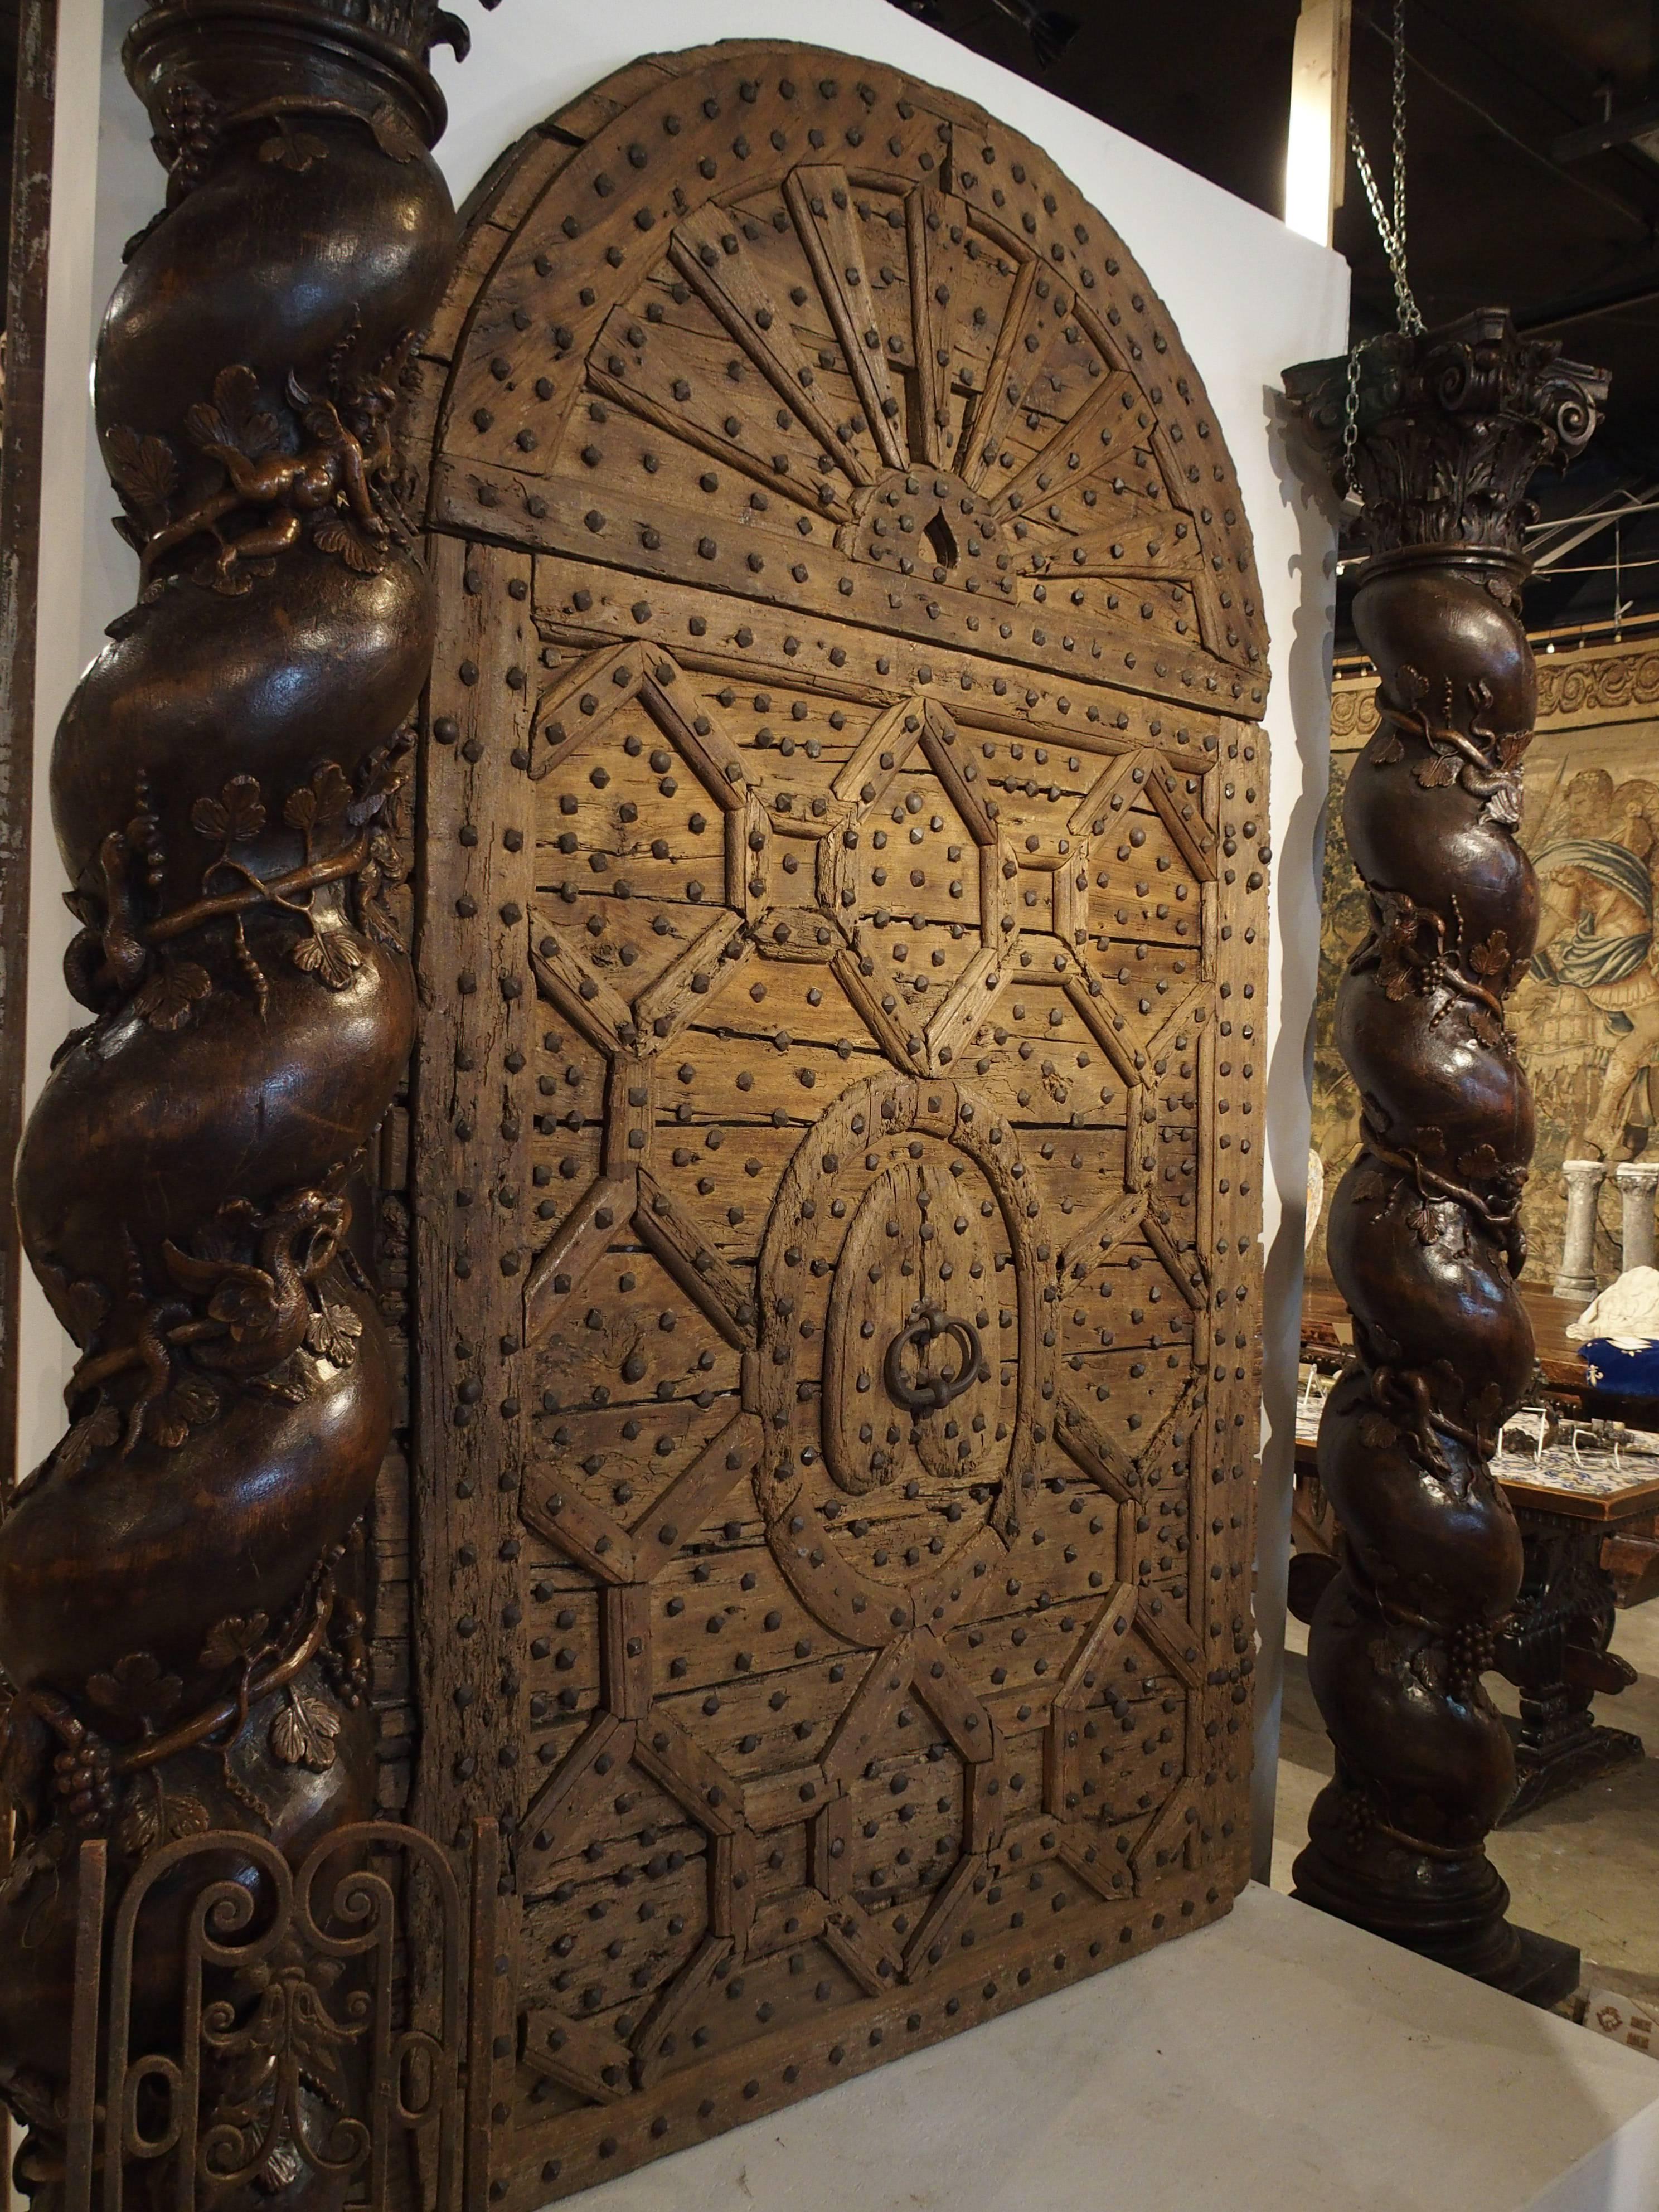 Spanish Magnificent 17th Century Monastery Door from Spain